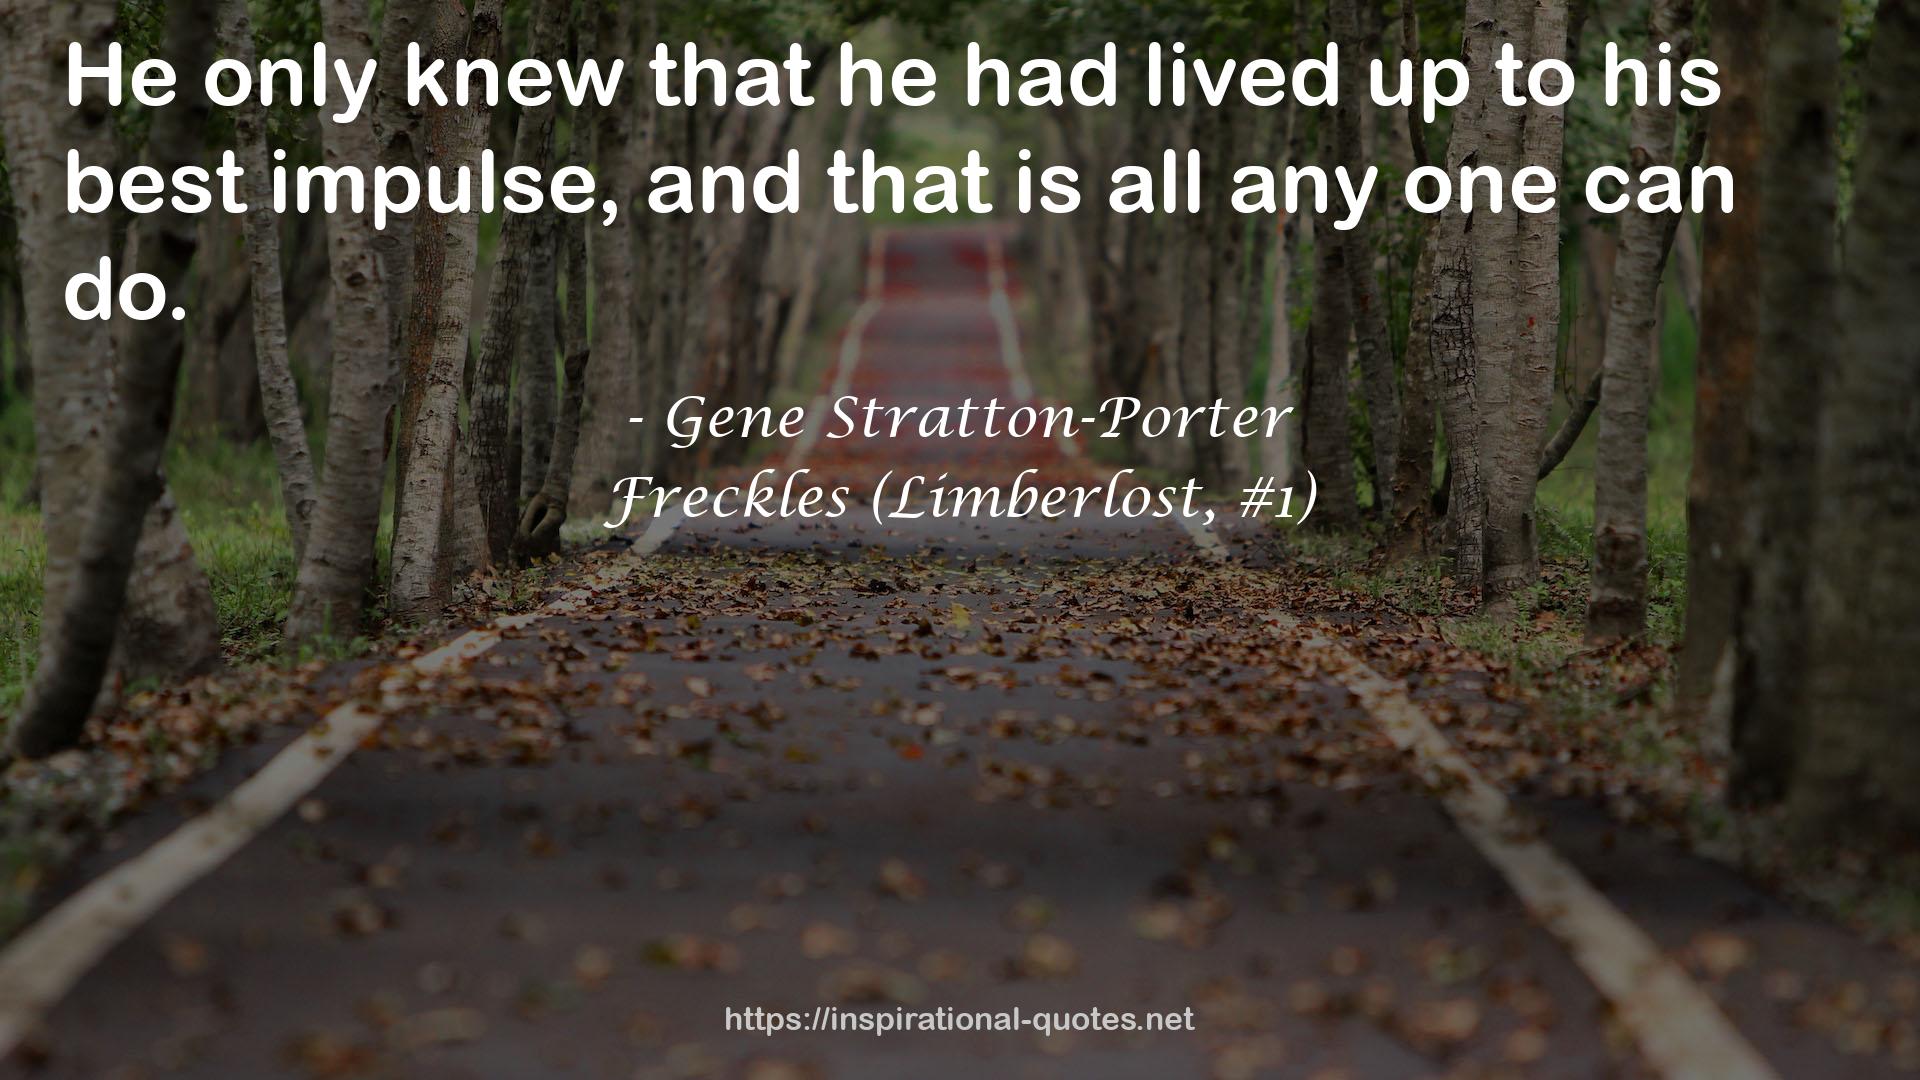 Freckles (Limberlost, #1) QUOTES